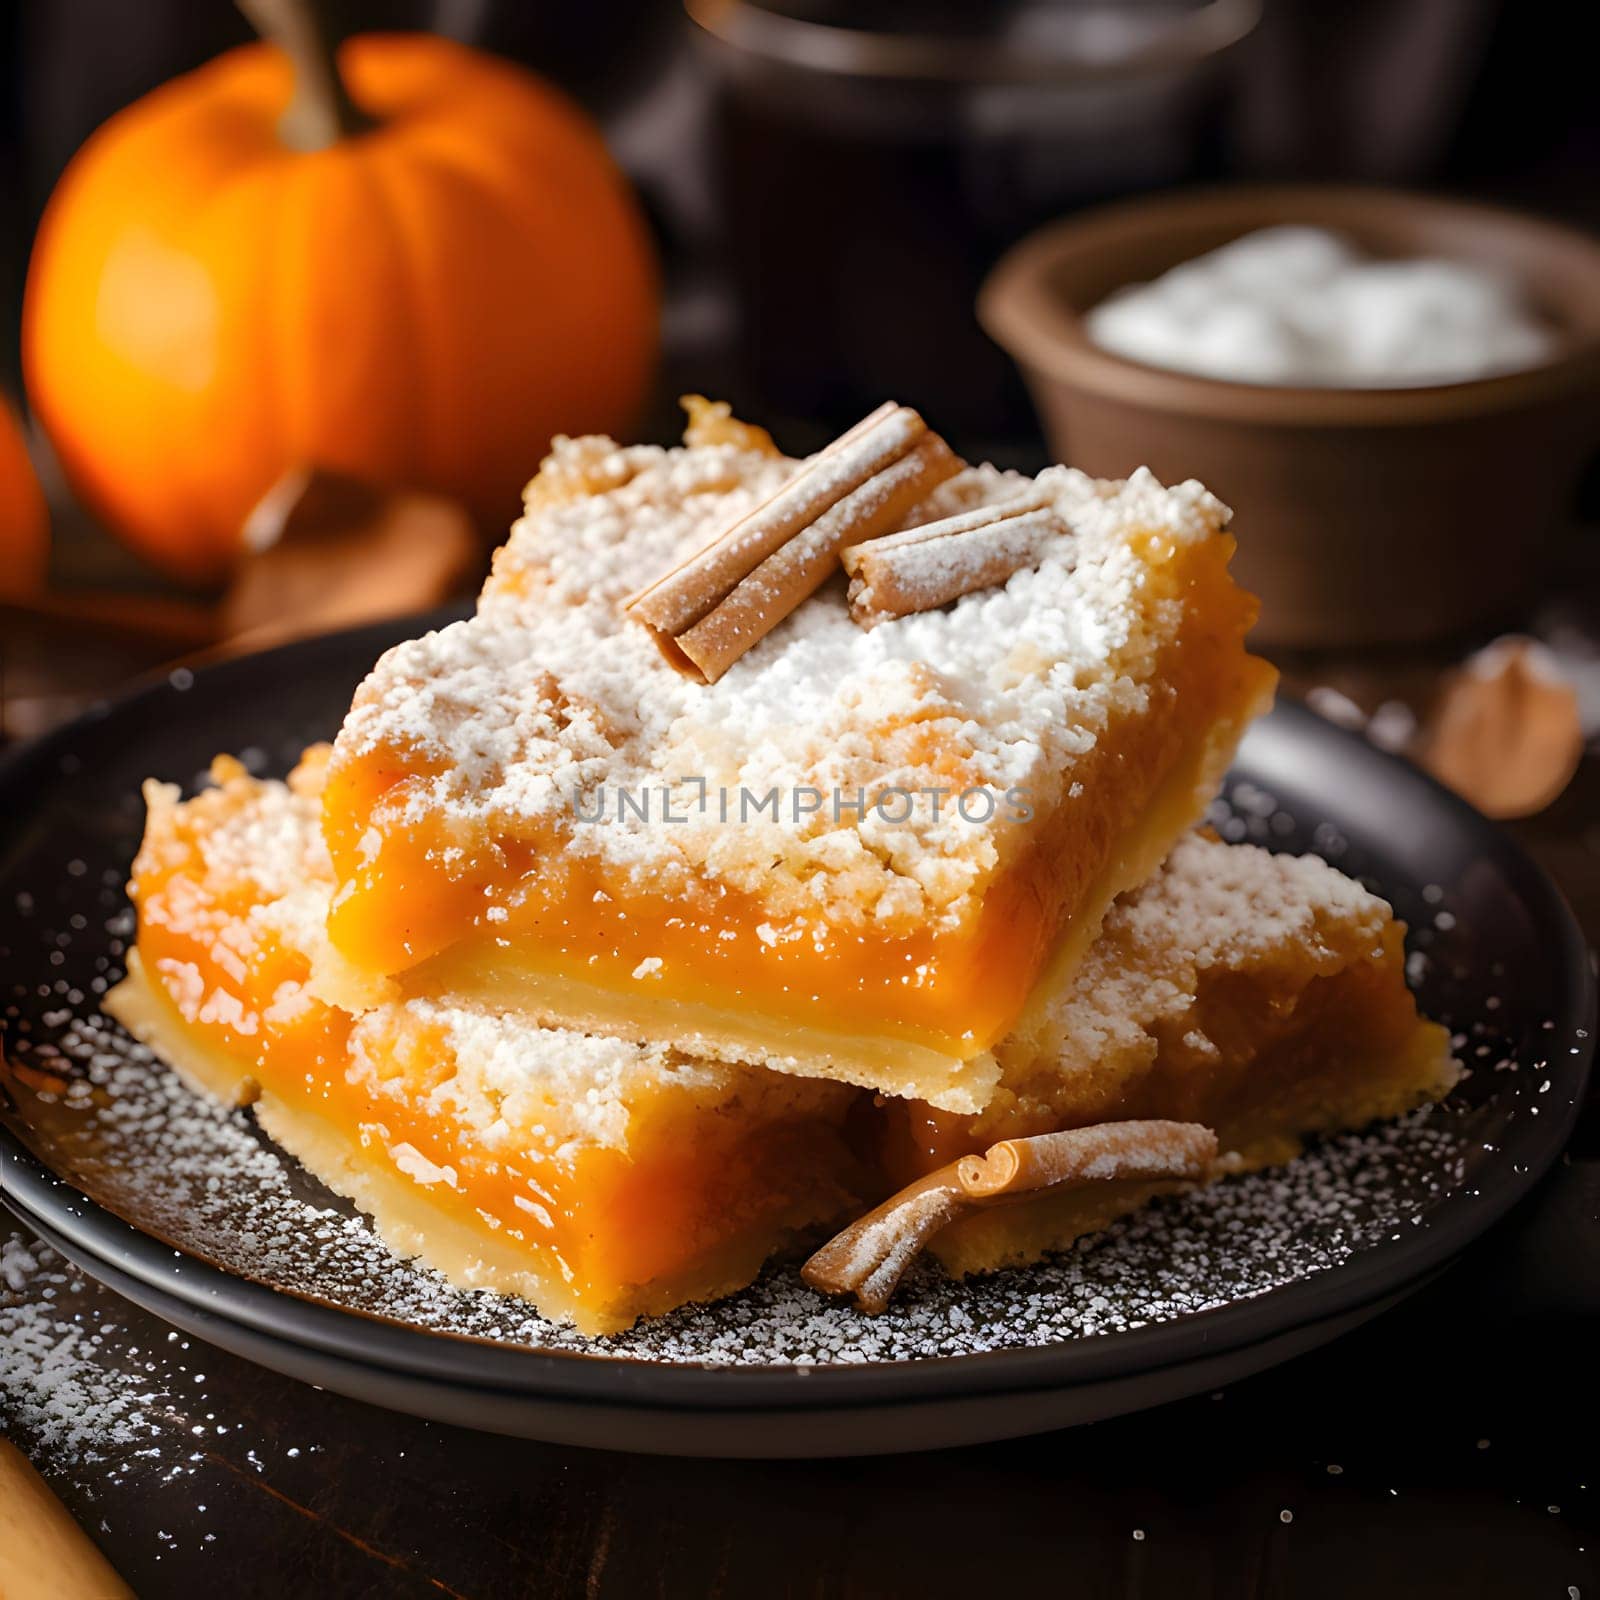 Two pieces of pumpkin pie sprinkled with powdered sugar on a dark plate, smudged background. Pumpkin as a dish of thanksgiving for the harvest. An atmosphere of joy and celebration.